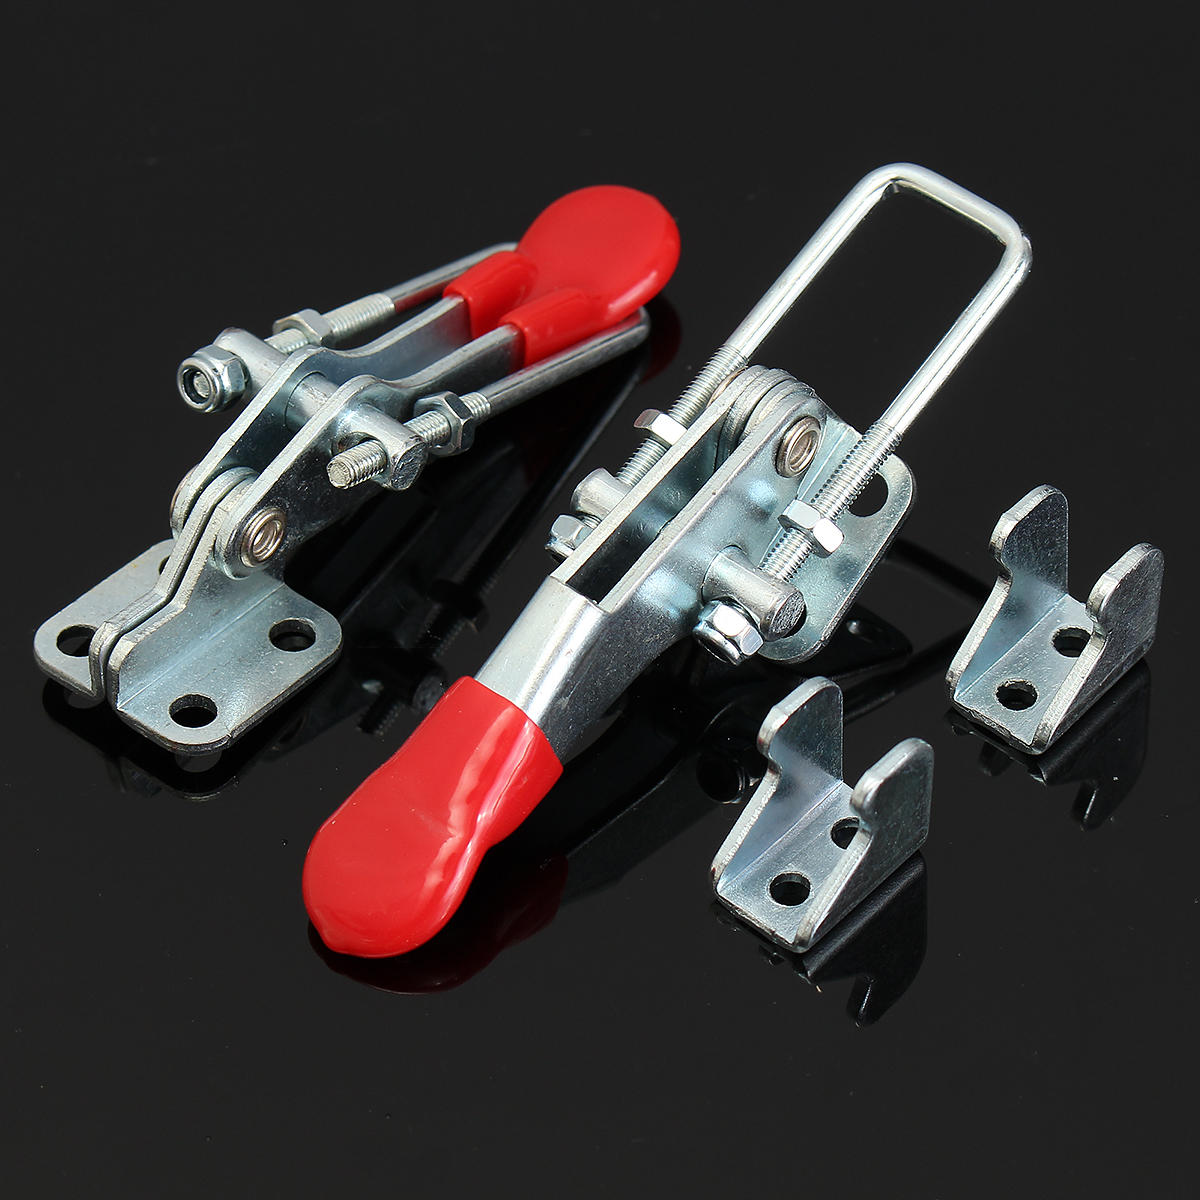 2Pcs Spring Loaded Toggle Galvanized Iron Latch Catches Hasp for Case Box Chest Trunk